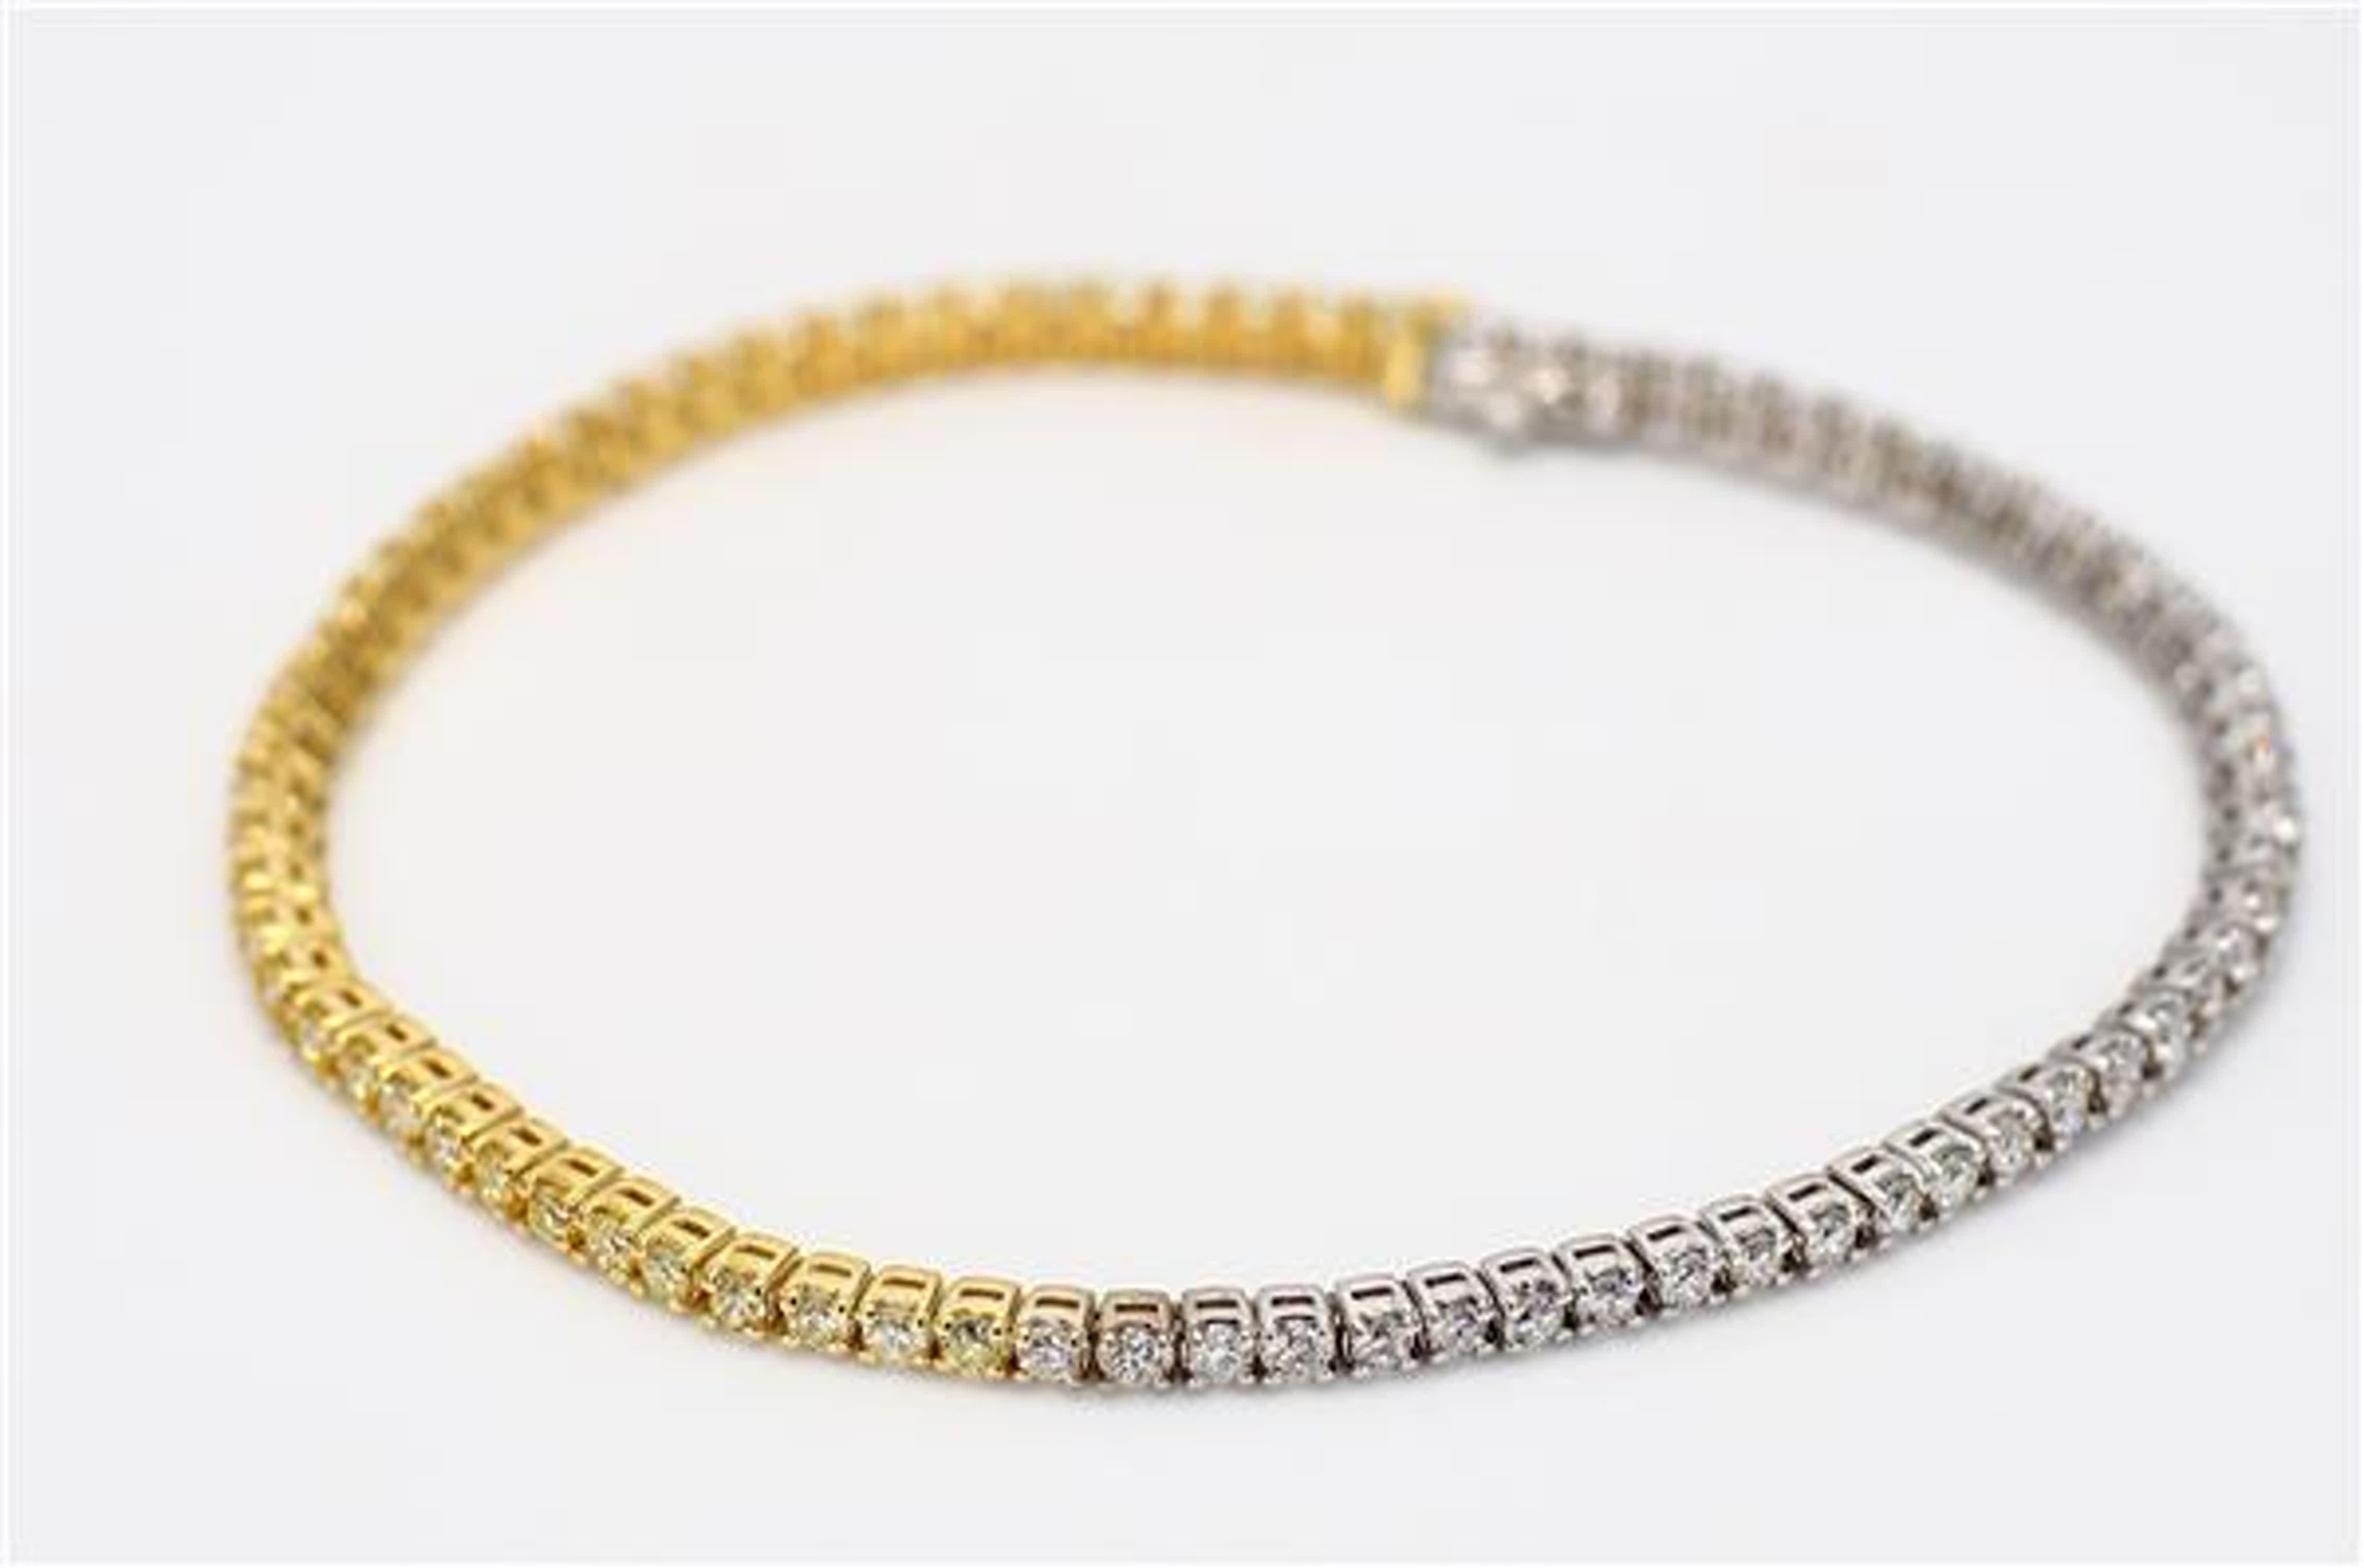 Natural Yellow Round and White Diamond 2.03 Carat TW Gold Tennis Bracelet For Sale 1